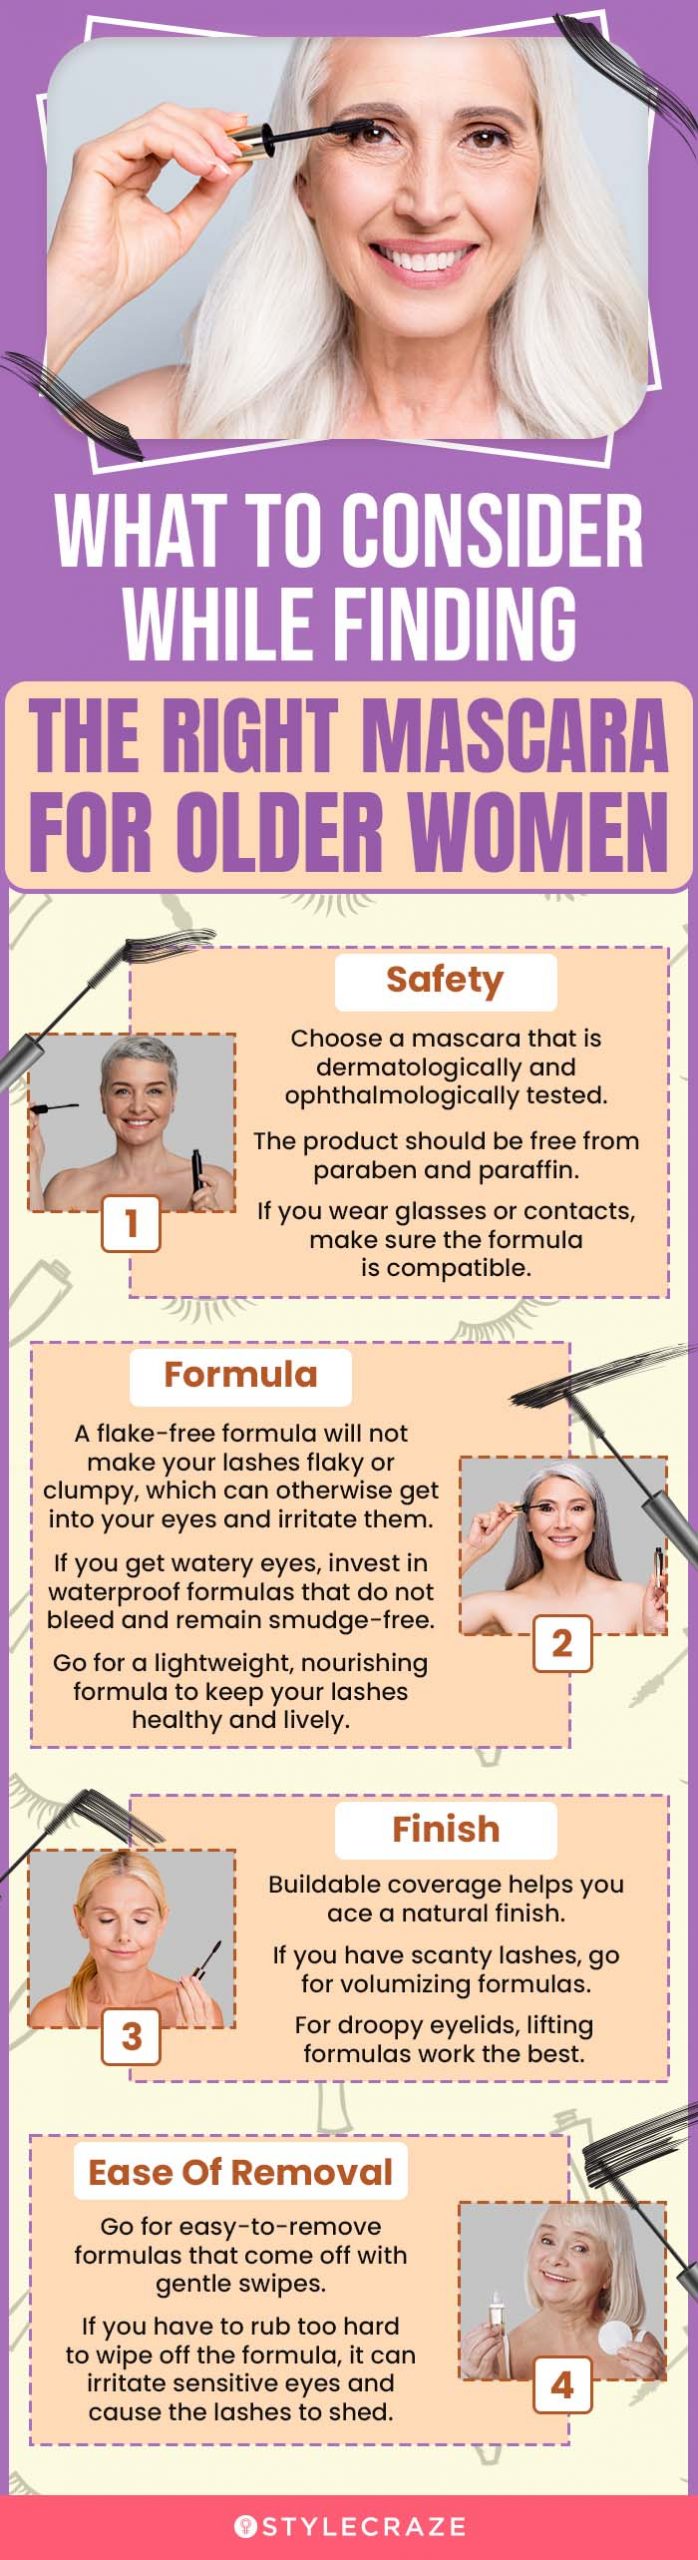 What To Consider While Finding The Right Mascara For Older Women [infographic]